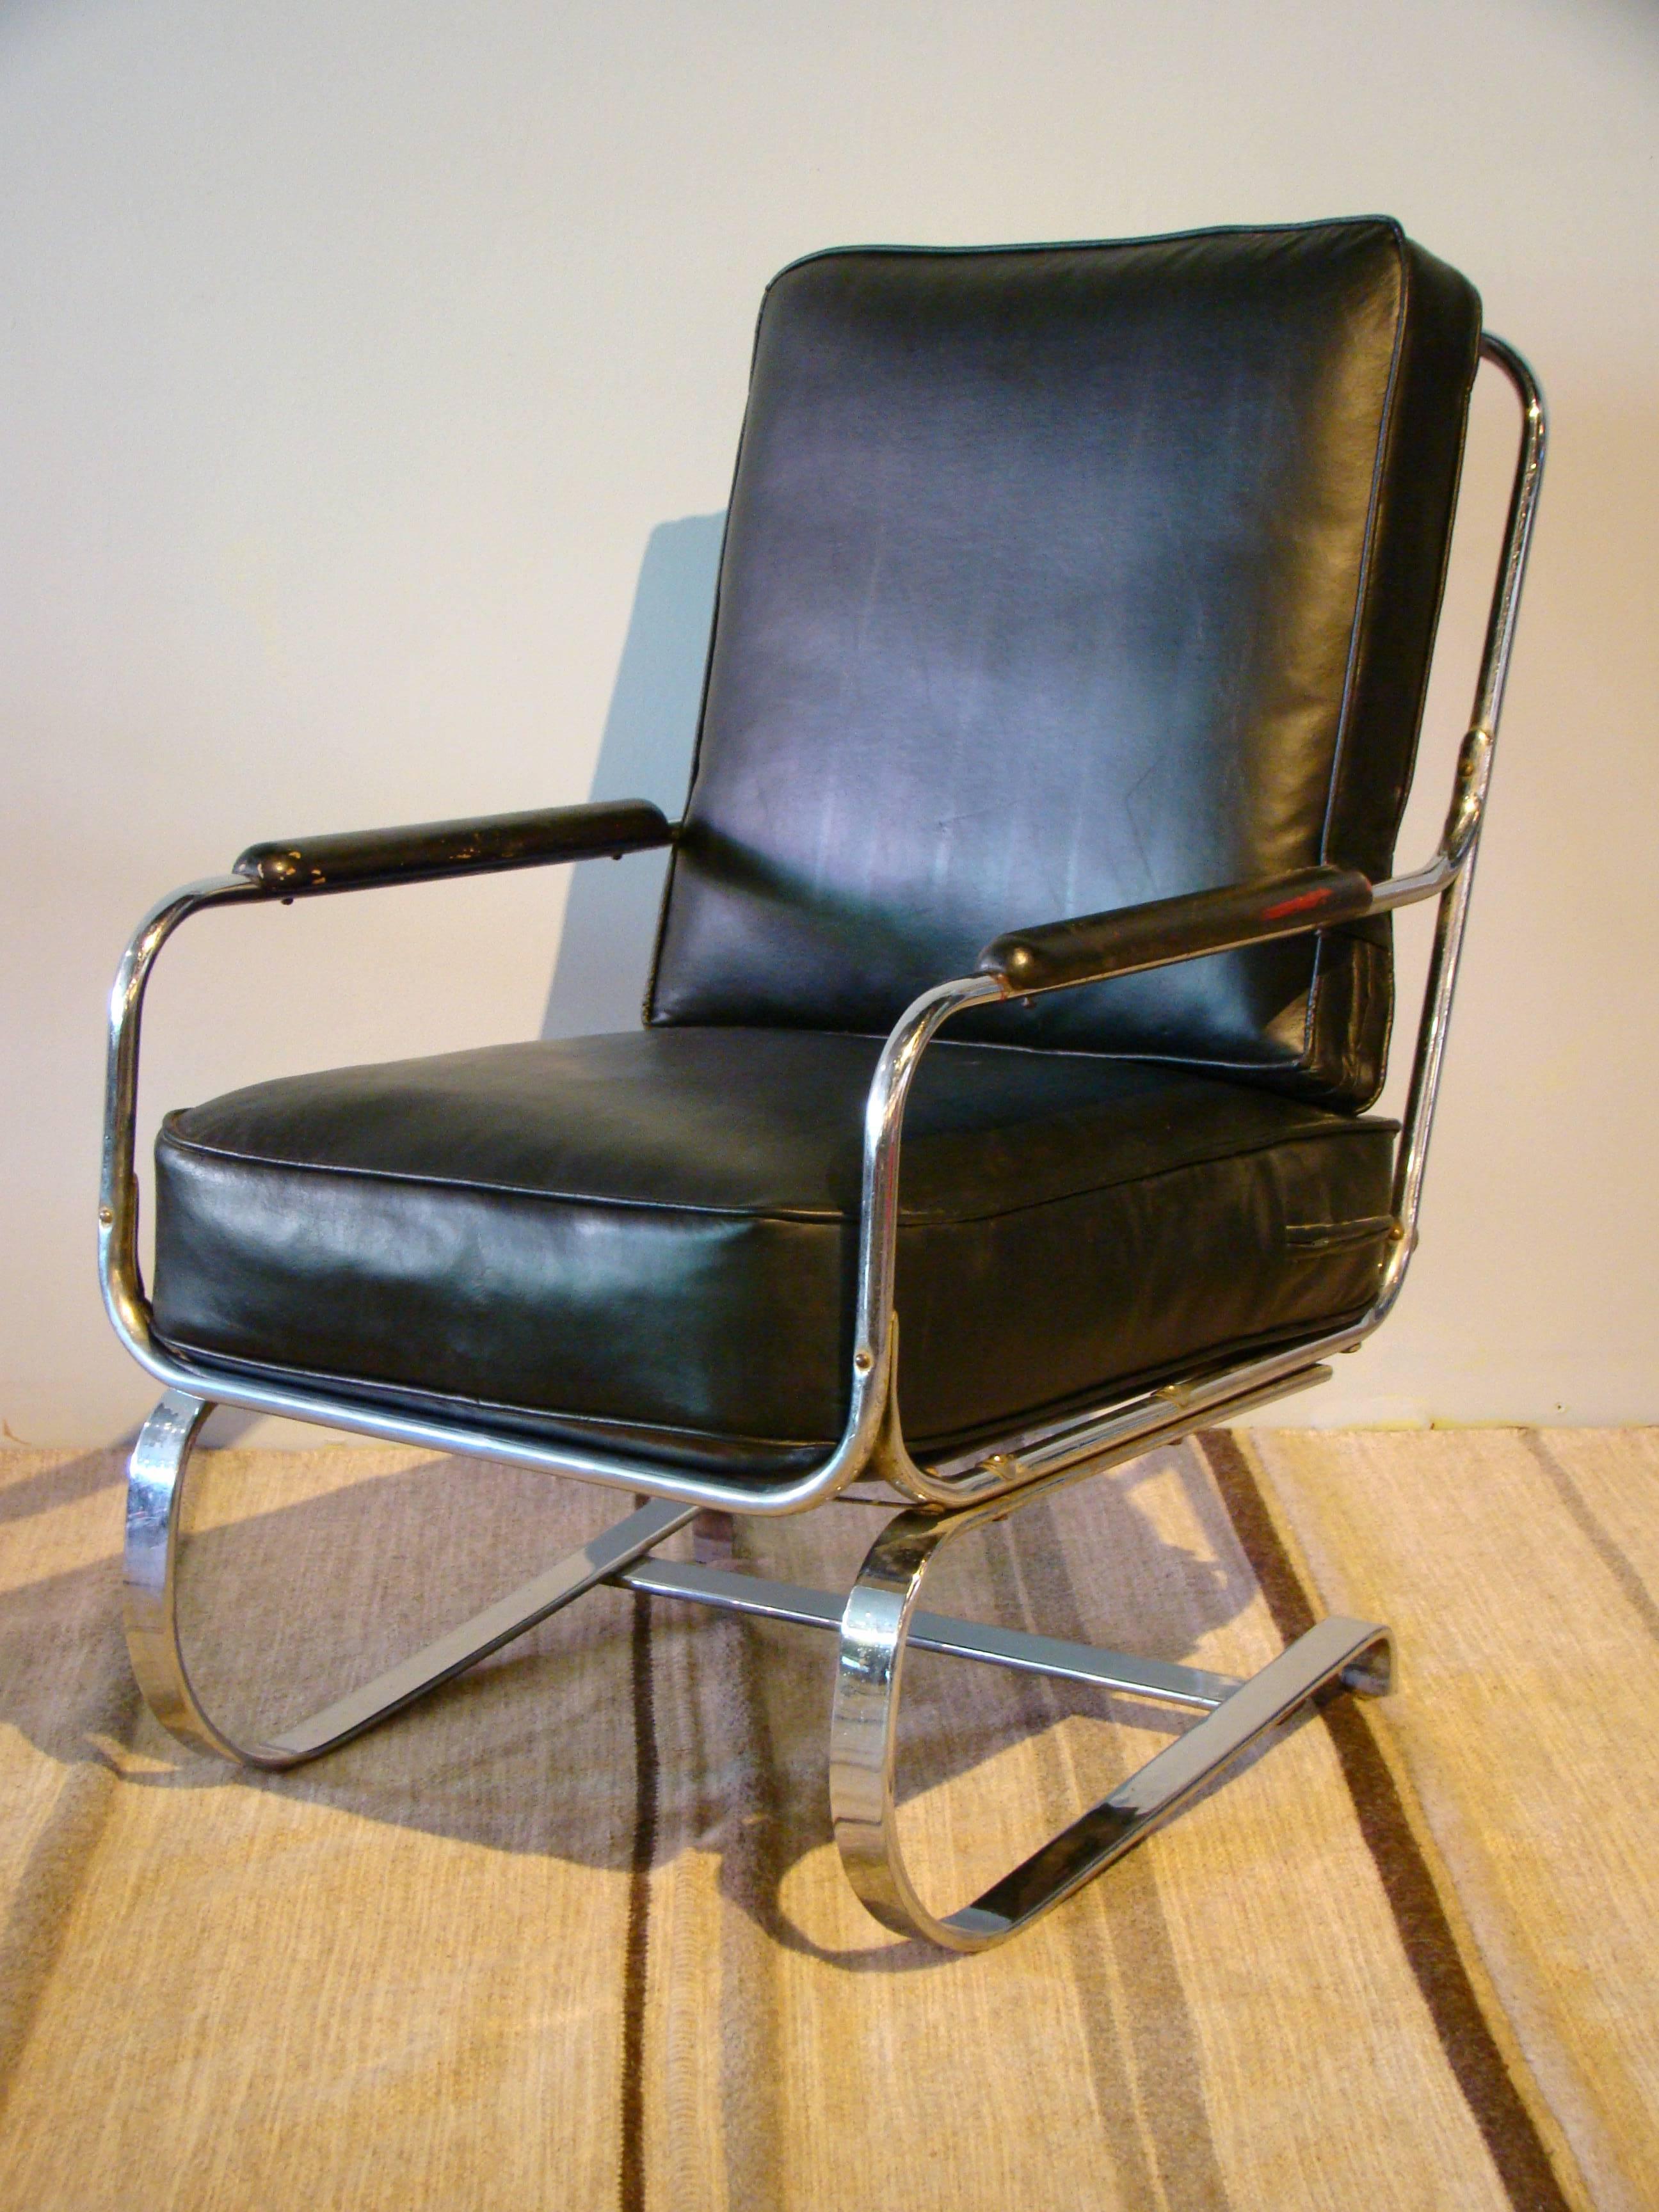 KEM Weber designed this Avant Garde lounge chair in the 1930s. It sits on flat bands of chrome and acts as a rocking chair. Superbly attractive and equally as comfortable.